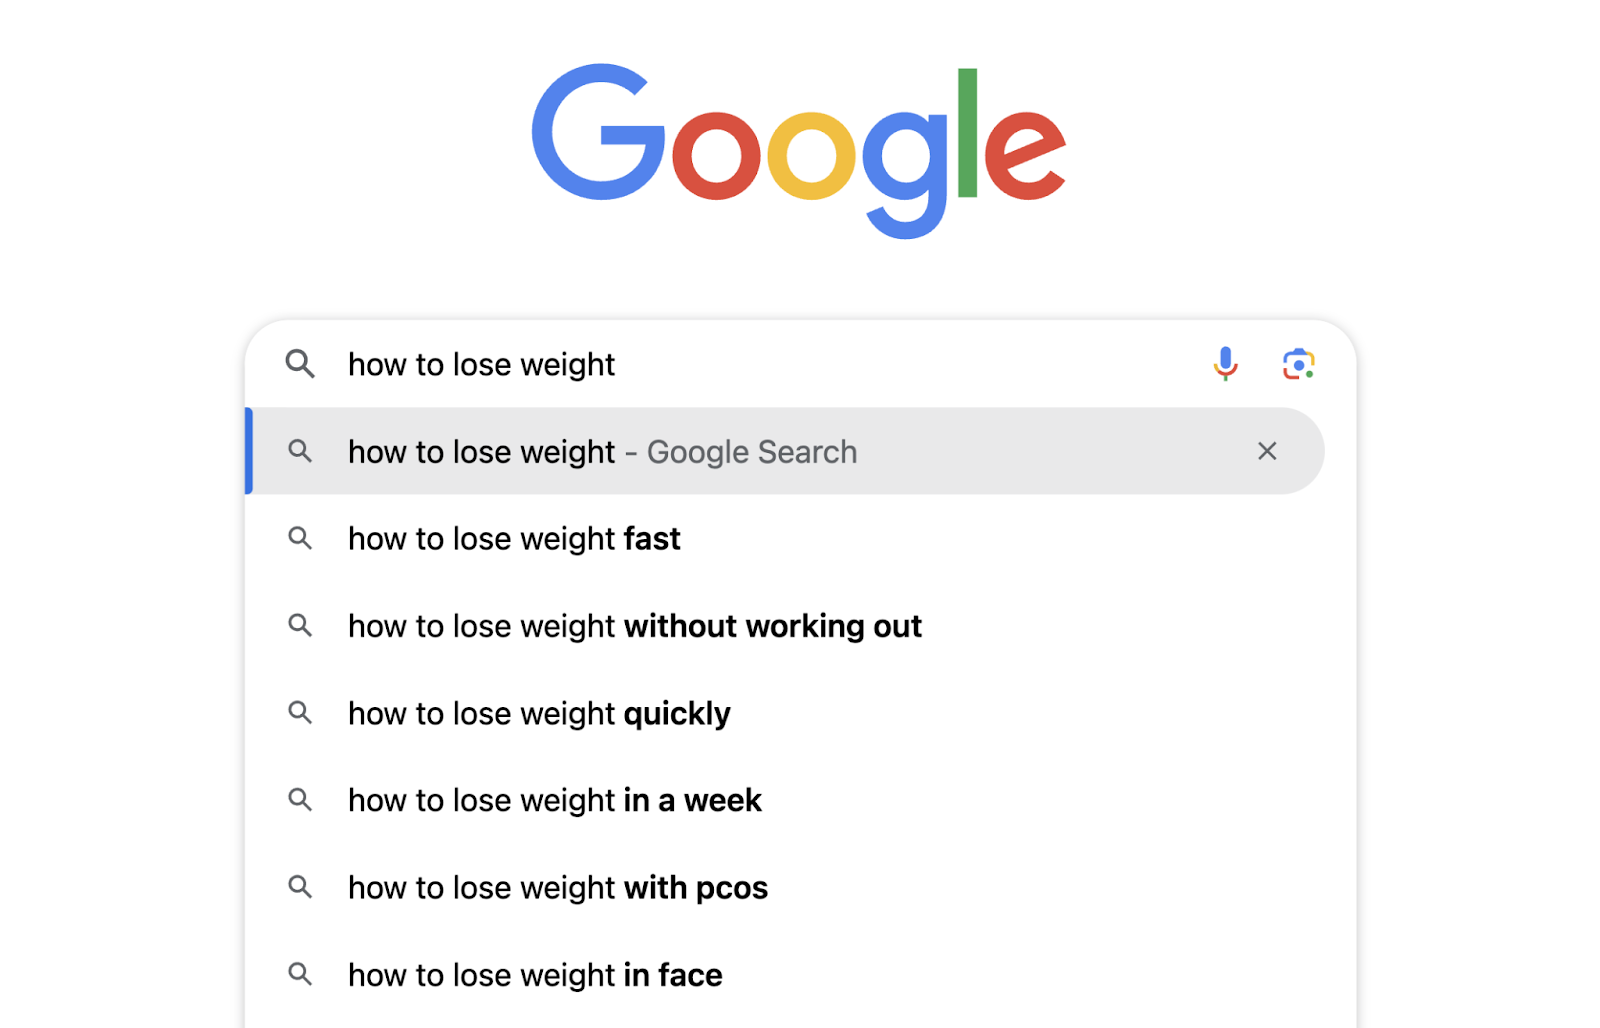 Autcomplete for google hunt  "how to suffer  weight" offers related keywords similar  however  to suffer  value   fast, however  to suffer  value   without moving   out, however  to suffer  value   successful  face, etc.